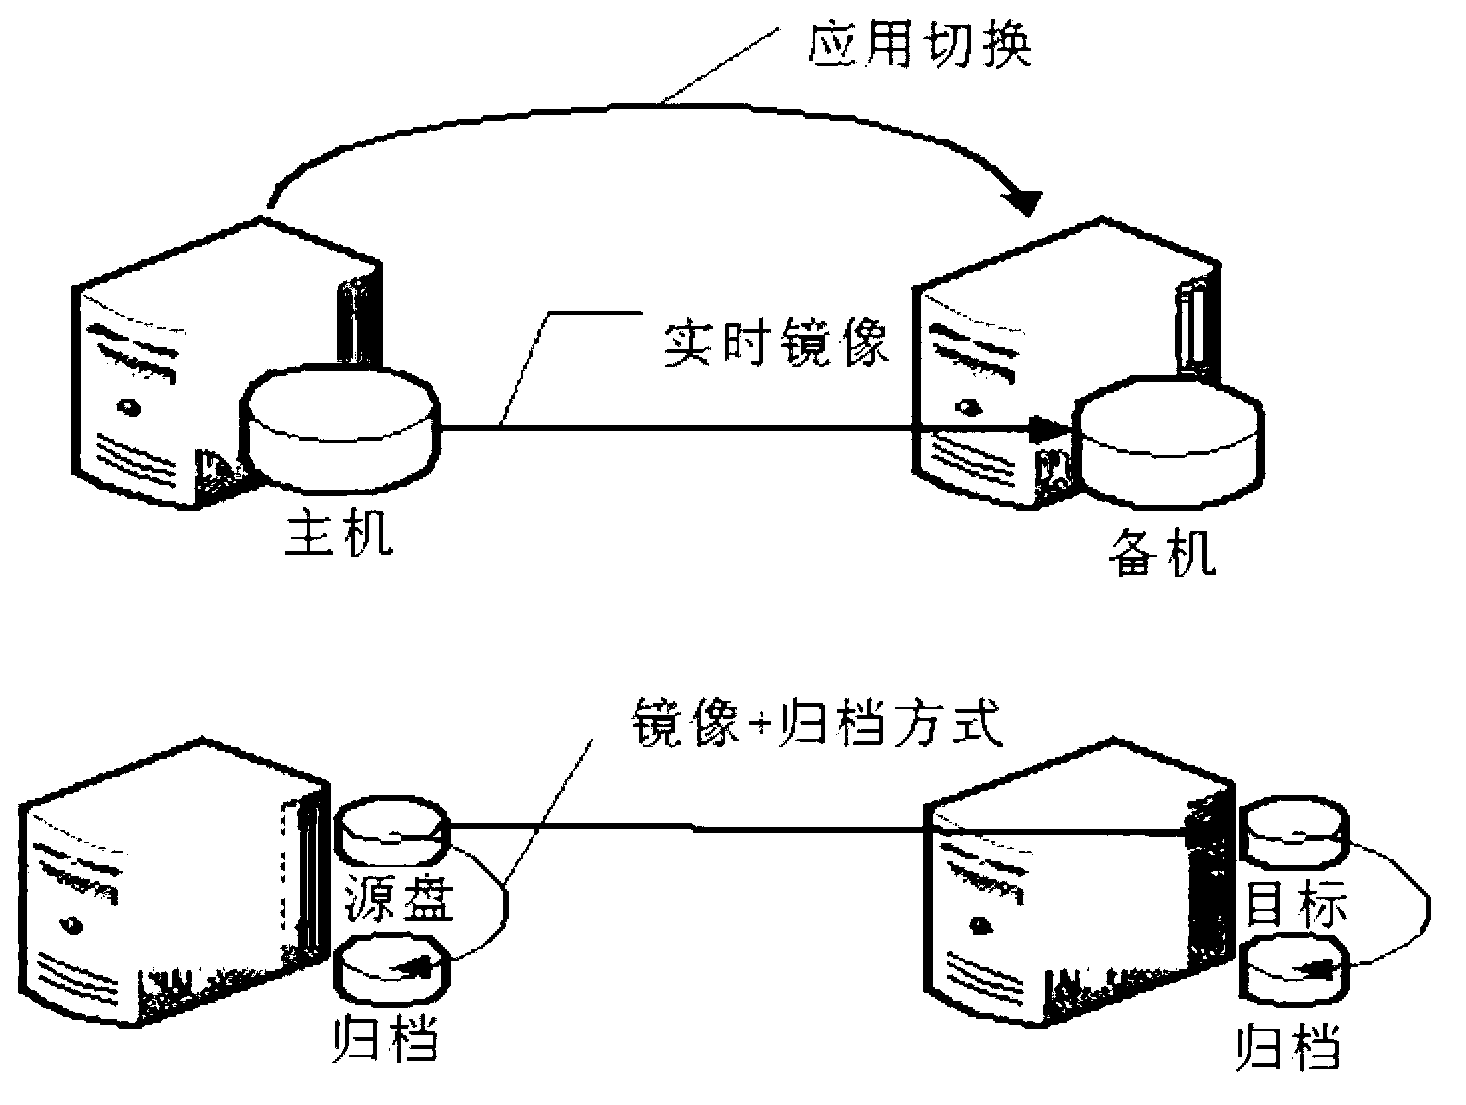 Distributed program trading system oriented to event processing